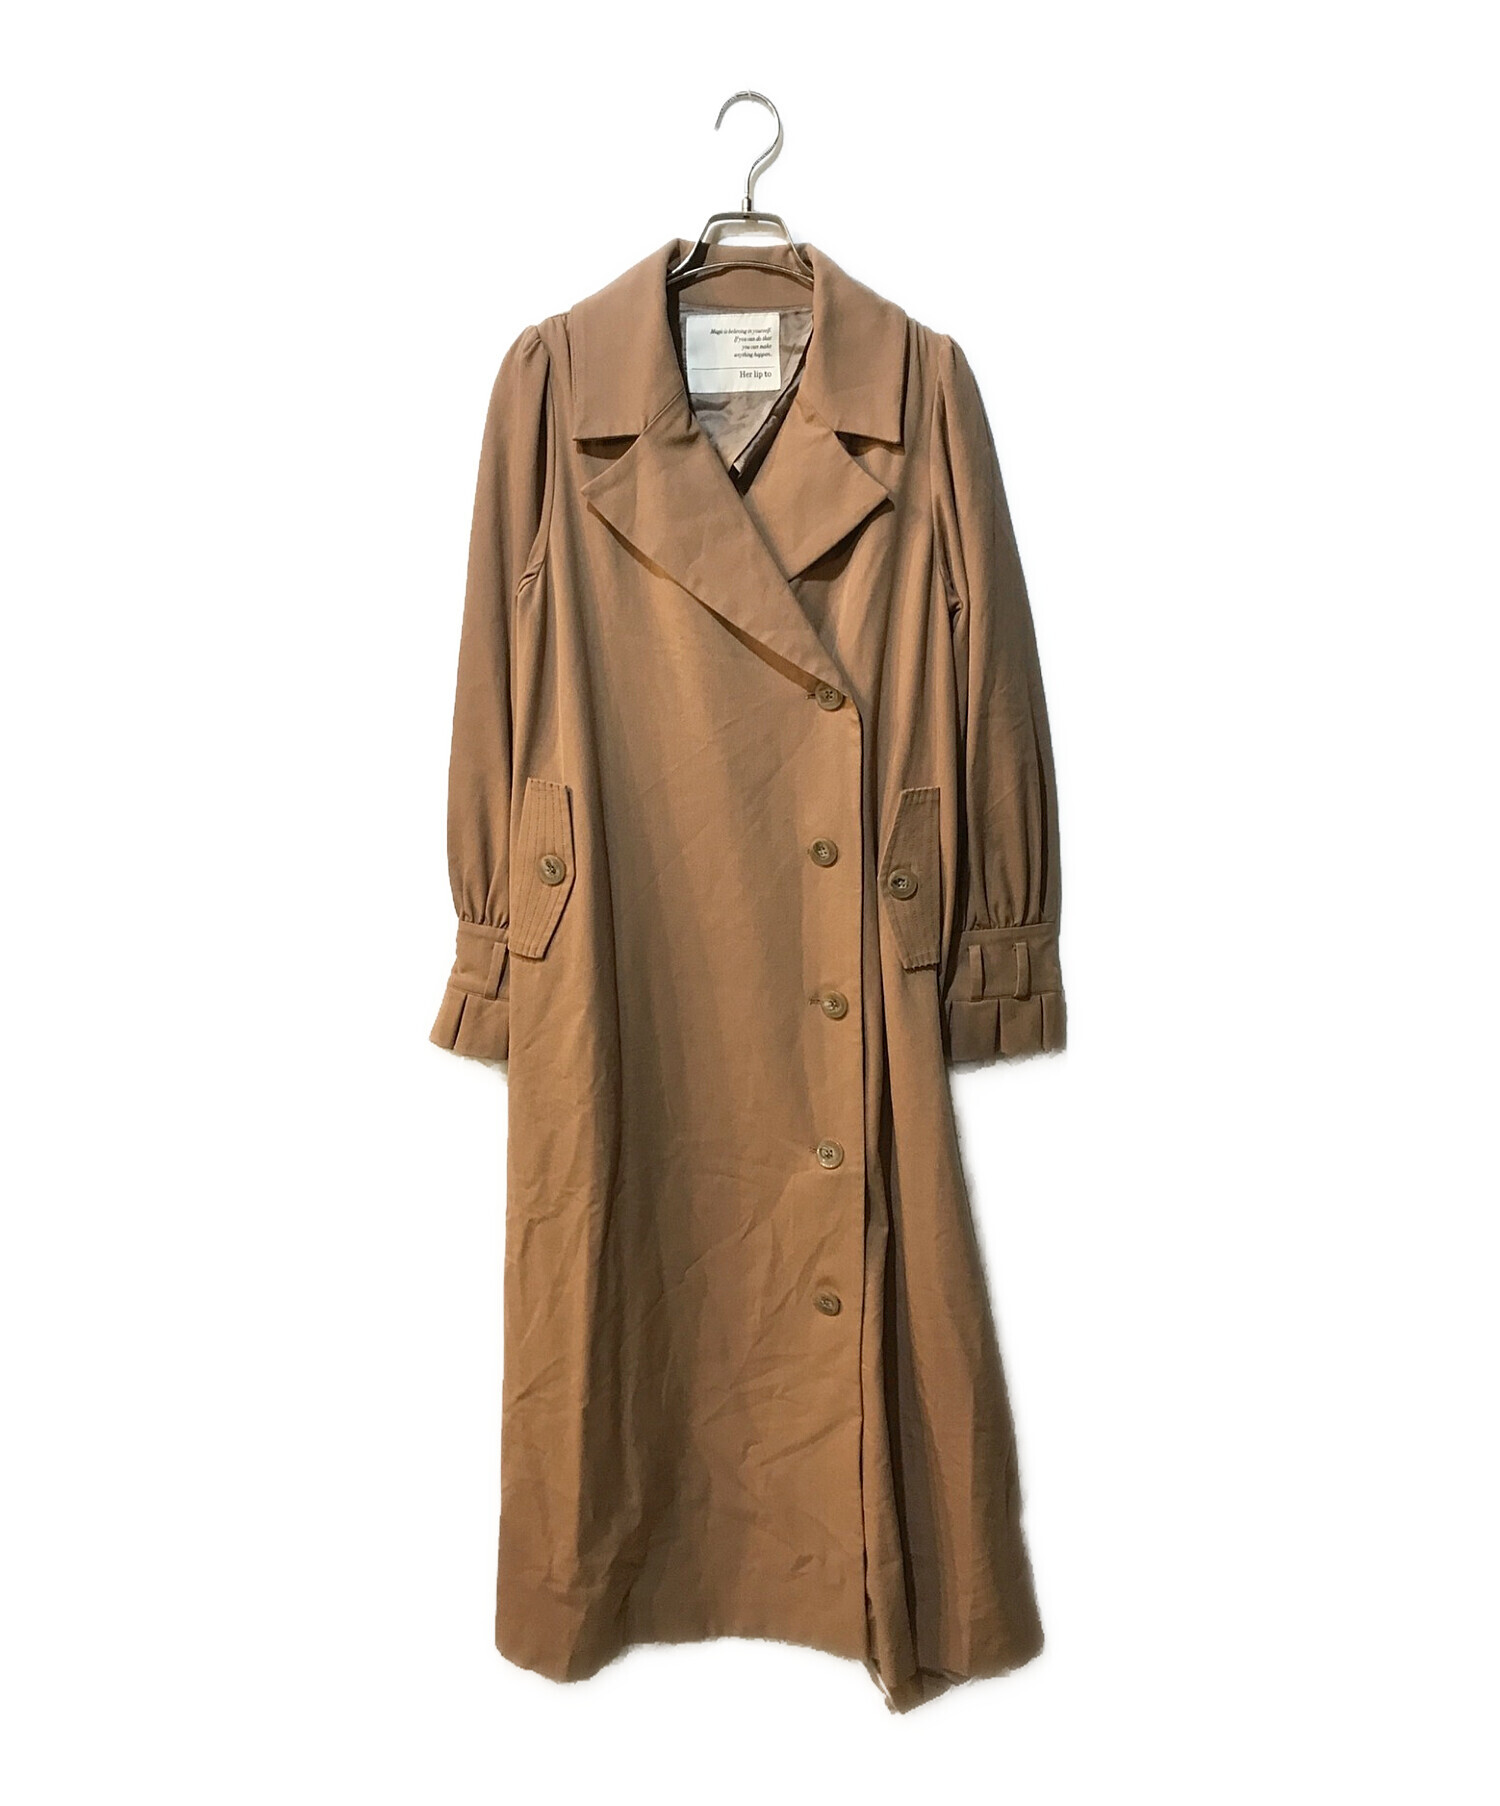 Her lip to Belted Dress Trench Coat - csihealth.net